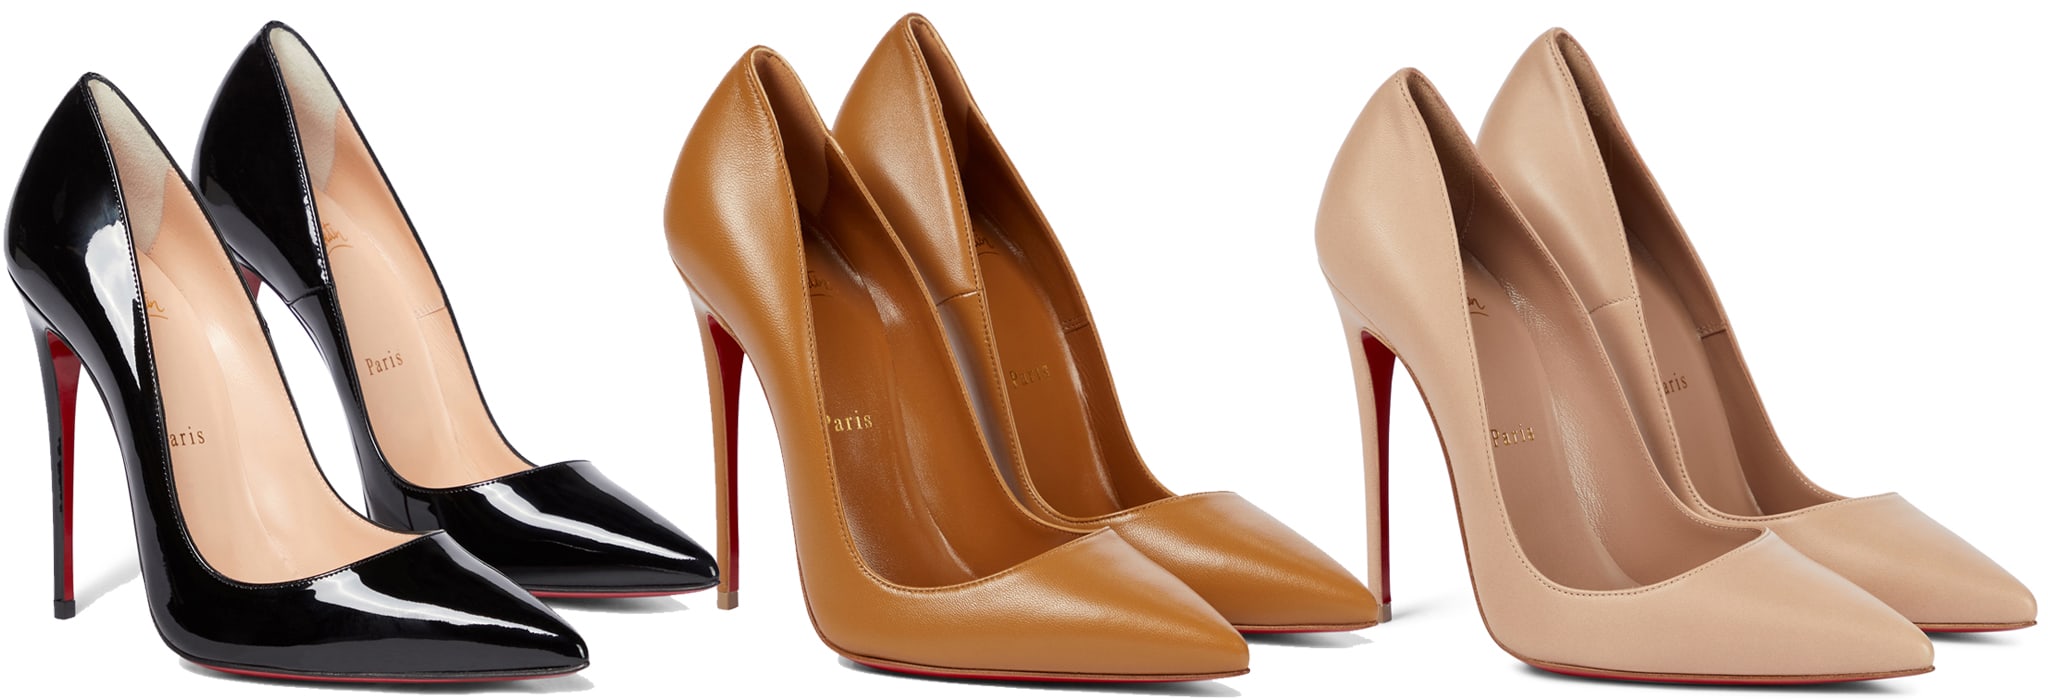 loop spion Premier Difference Between Heels and Pumps: 5 Shoe Types to Know